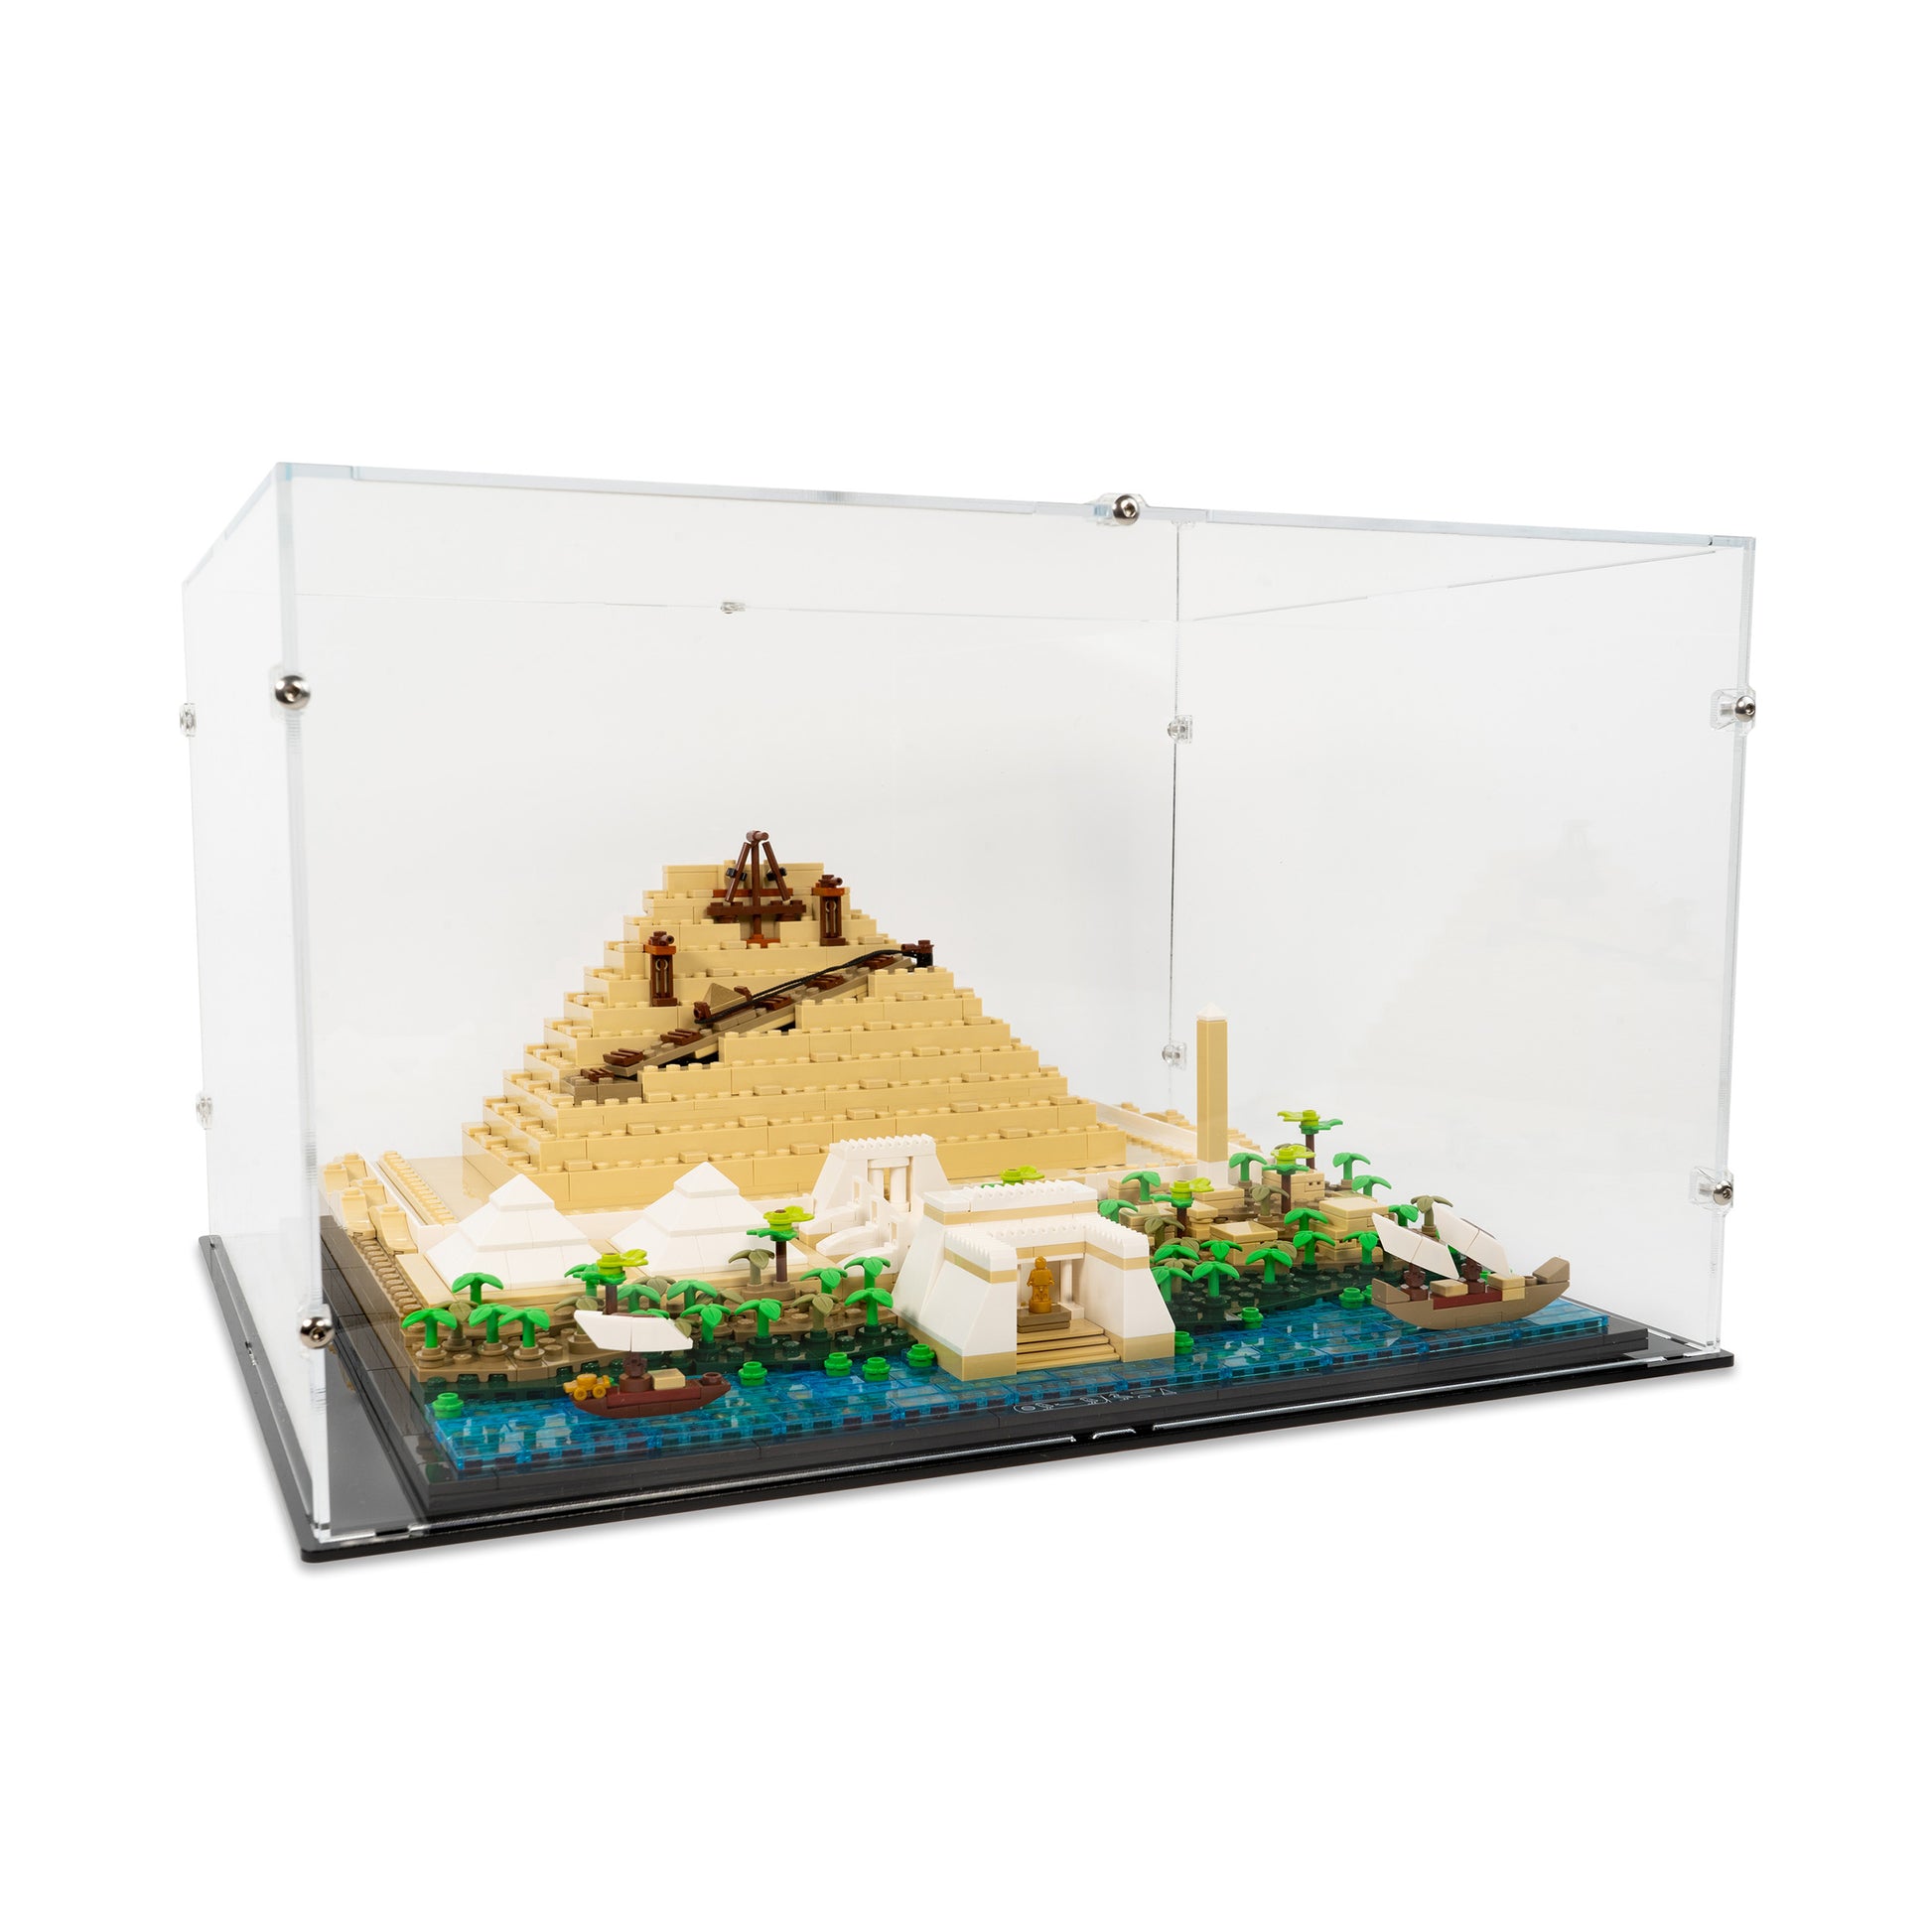 Angled view of LEGO 21058 Great Pyramid of Giza Display Case.